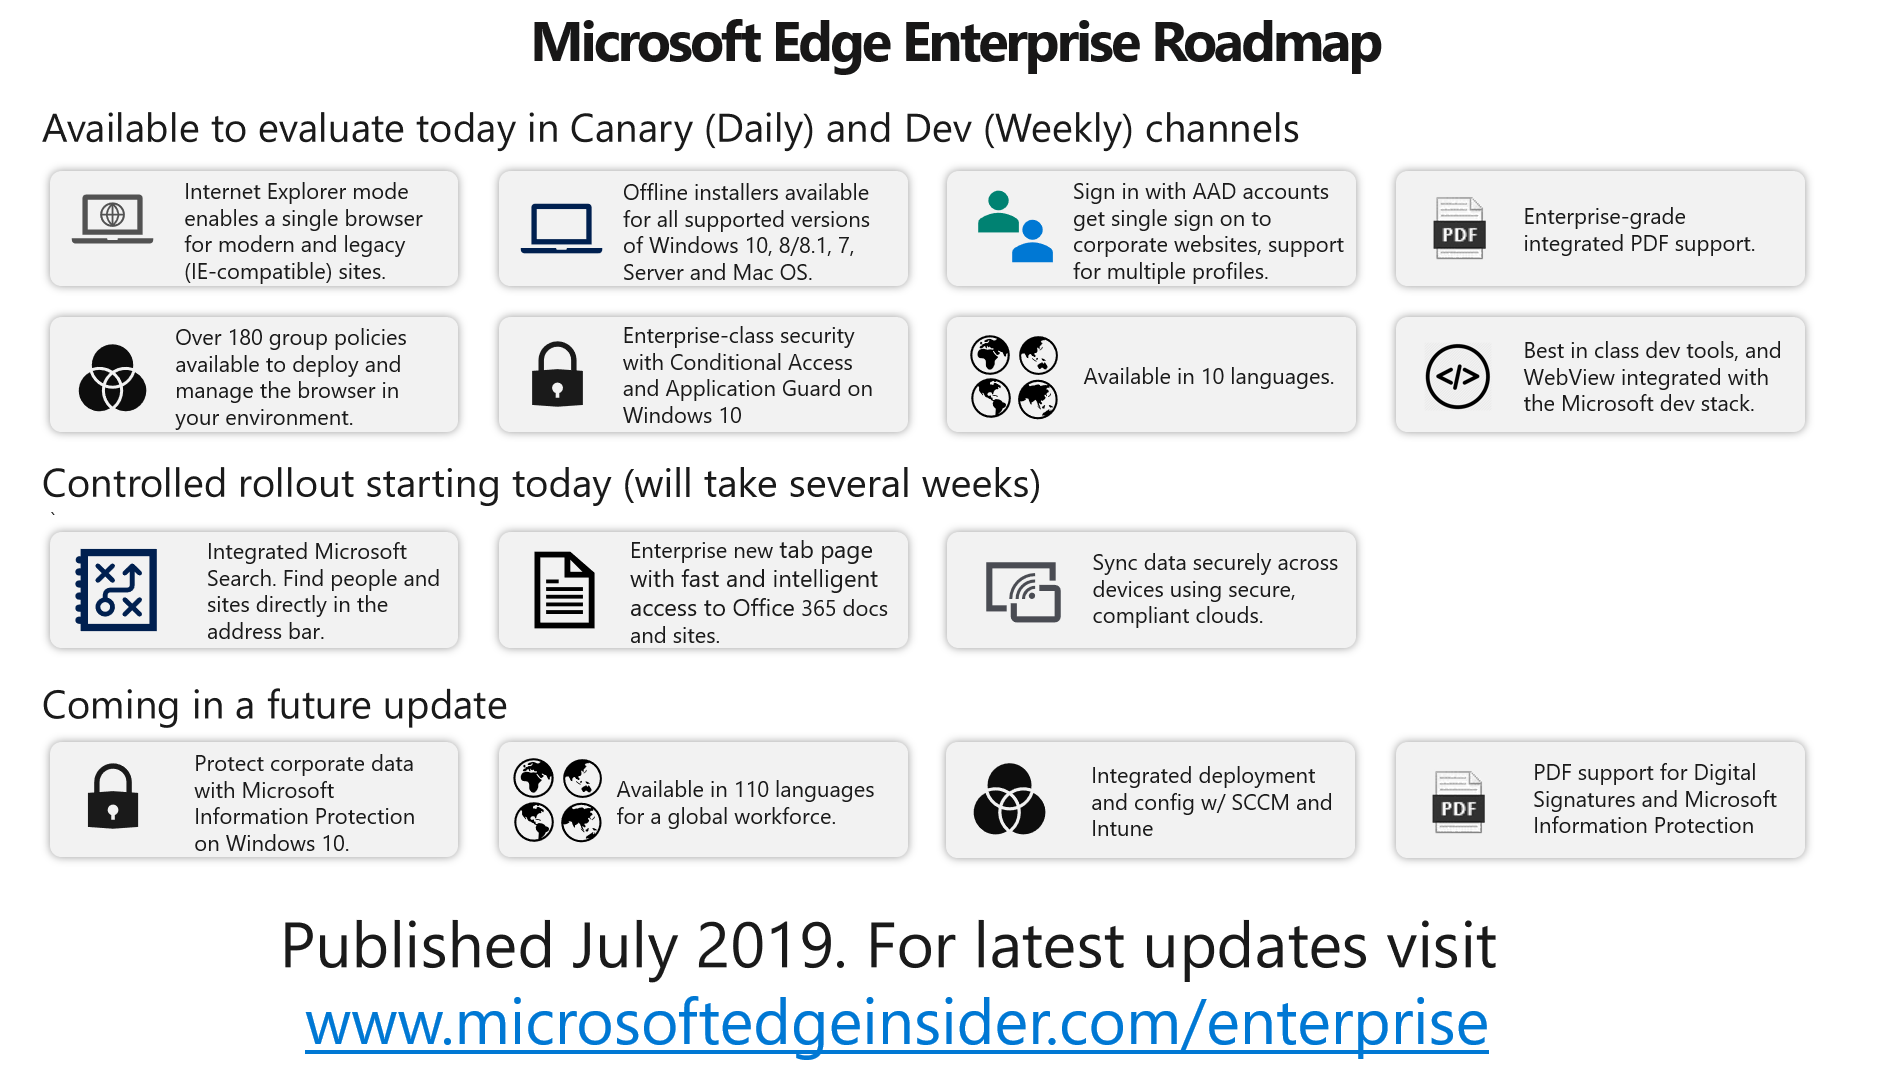 Roadmap chart showing Enterprise features available and coming soon (see www.microsoftedgeinsider.com/enterprise for details)